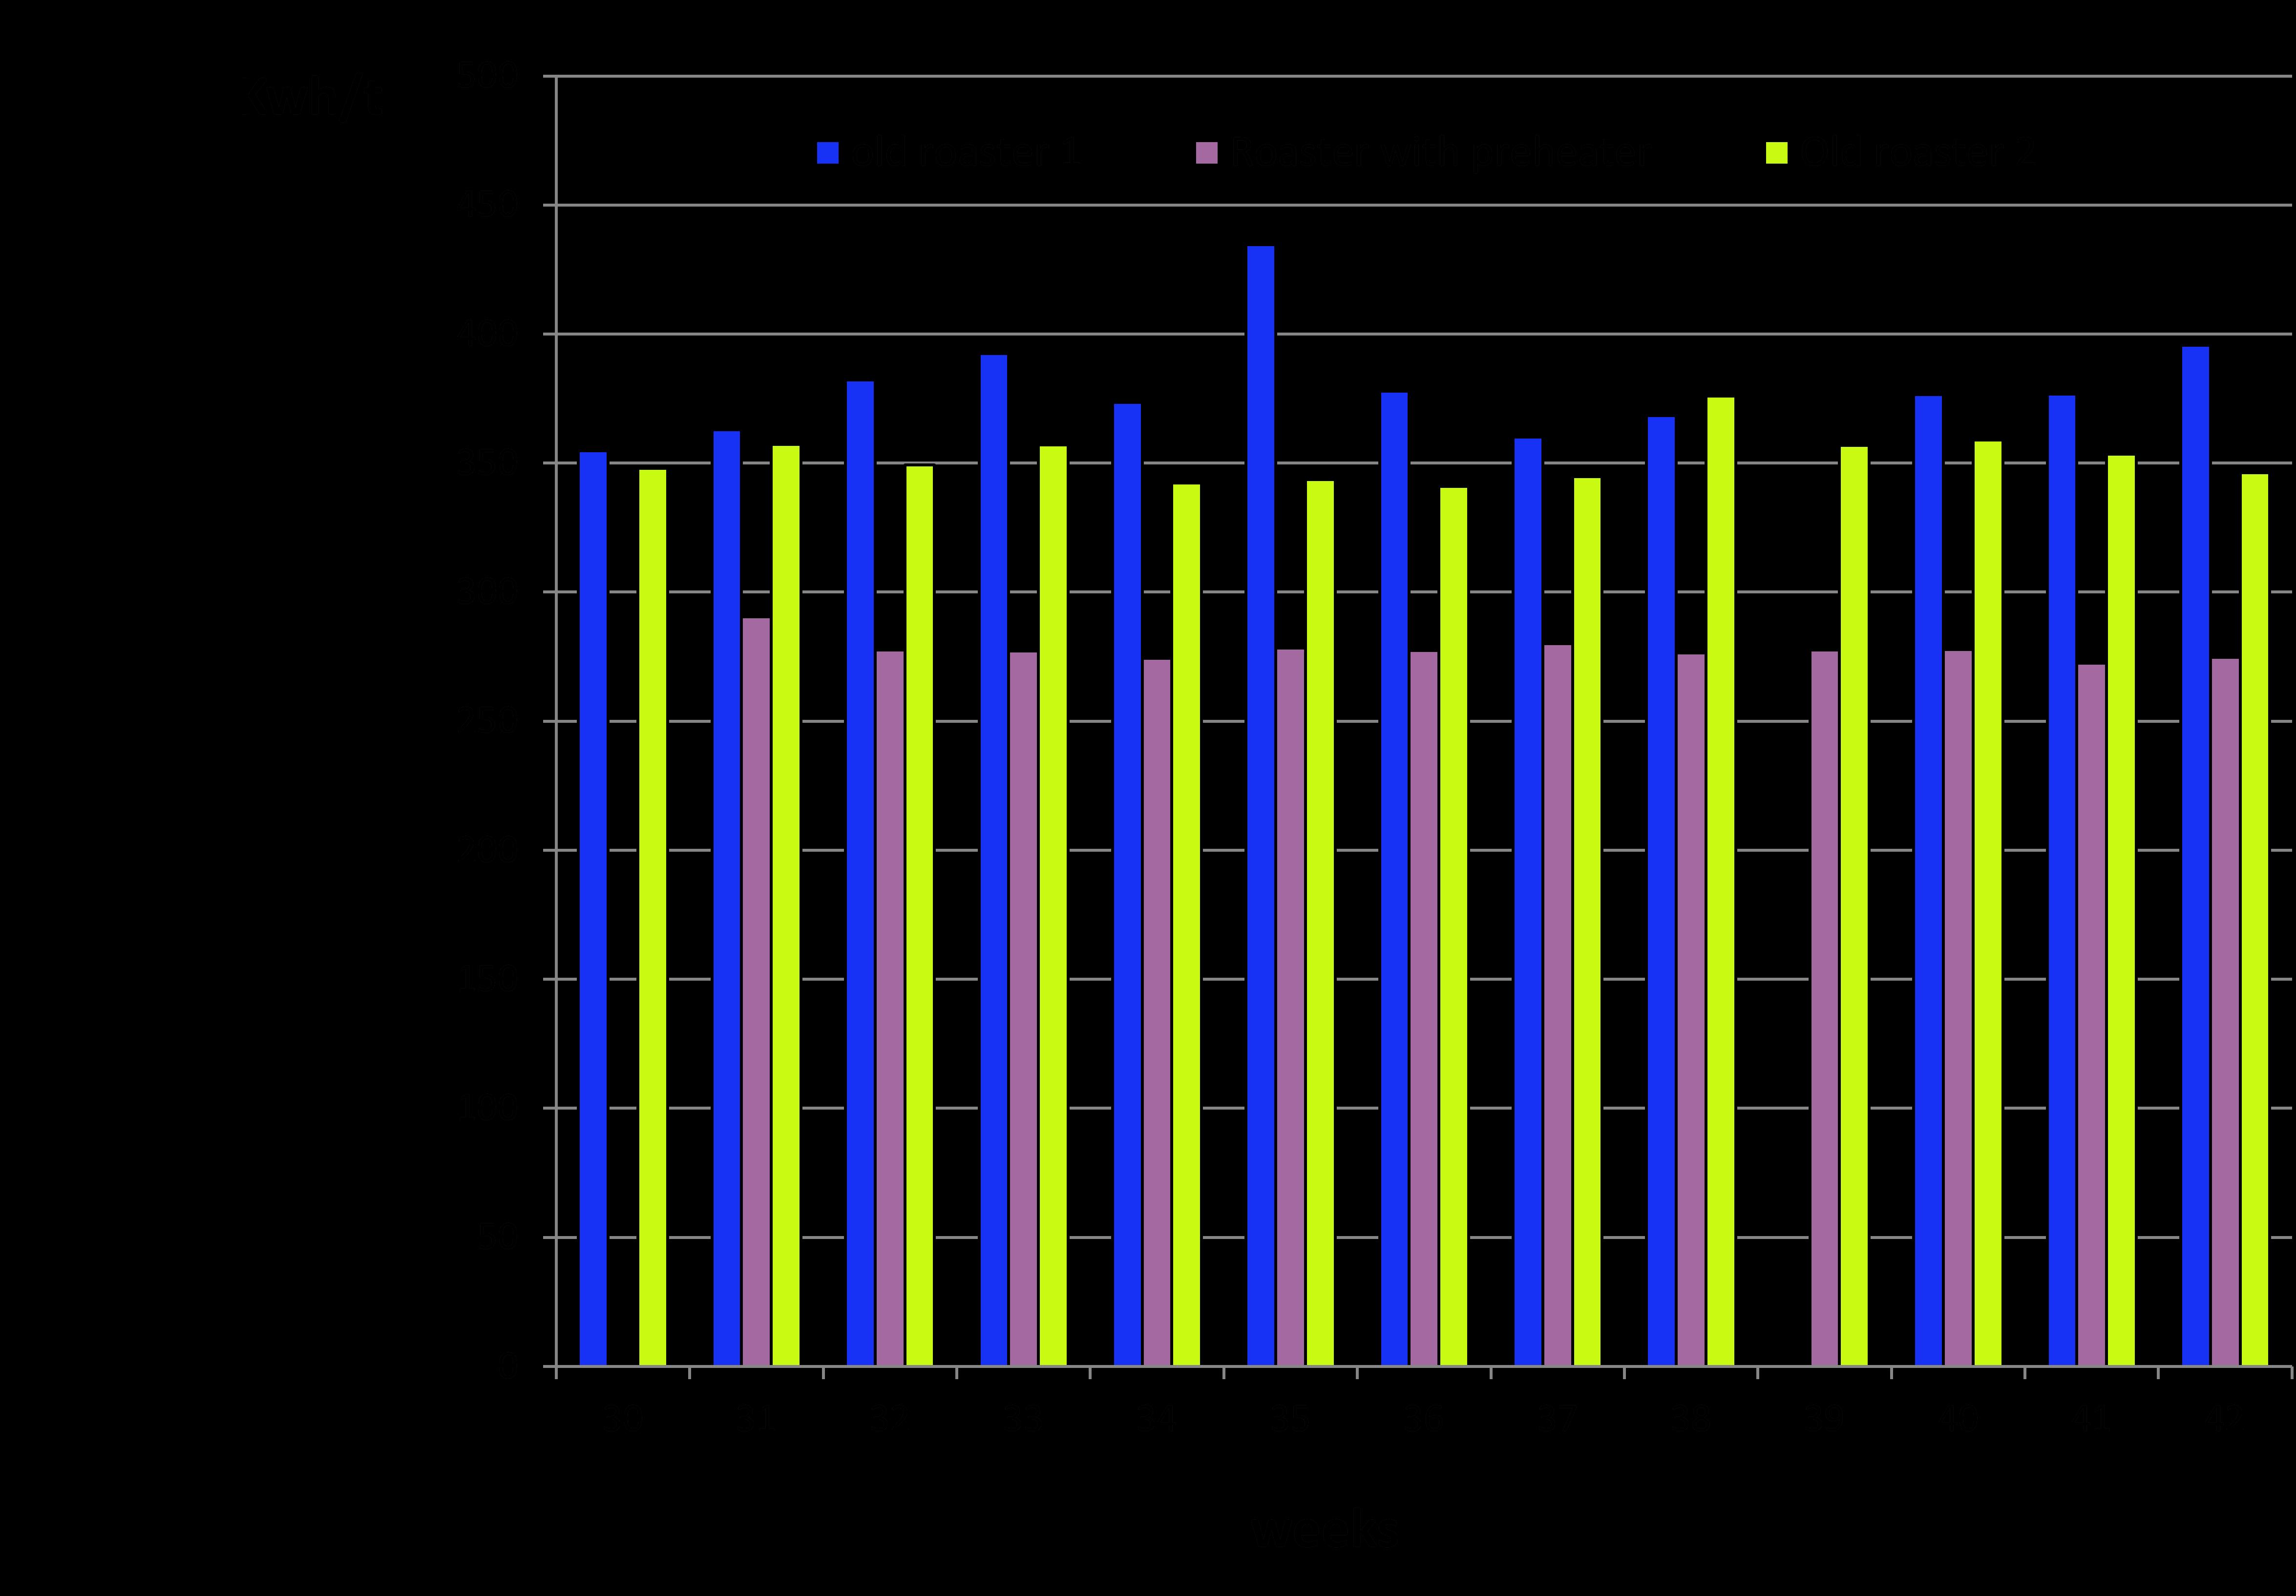 Figure: Weekly consumption of propane in 2013